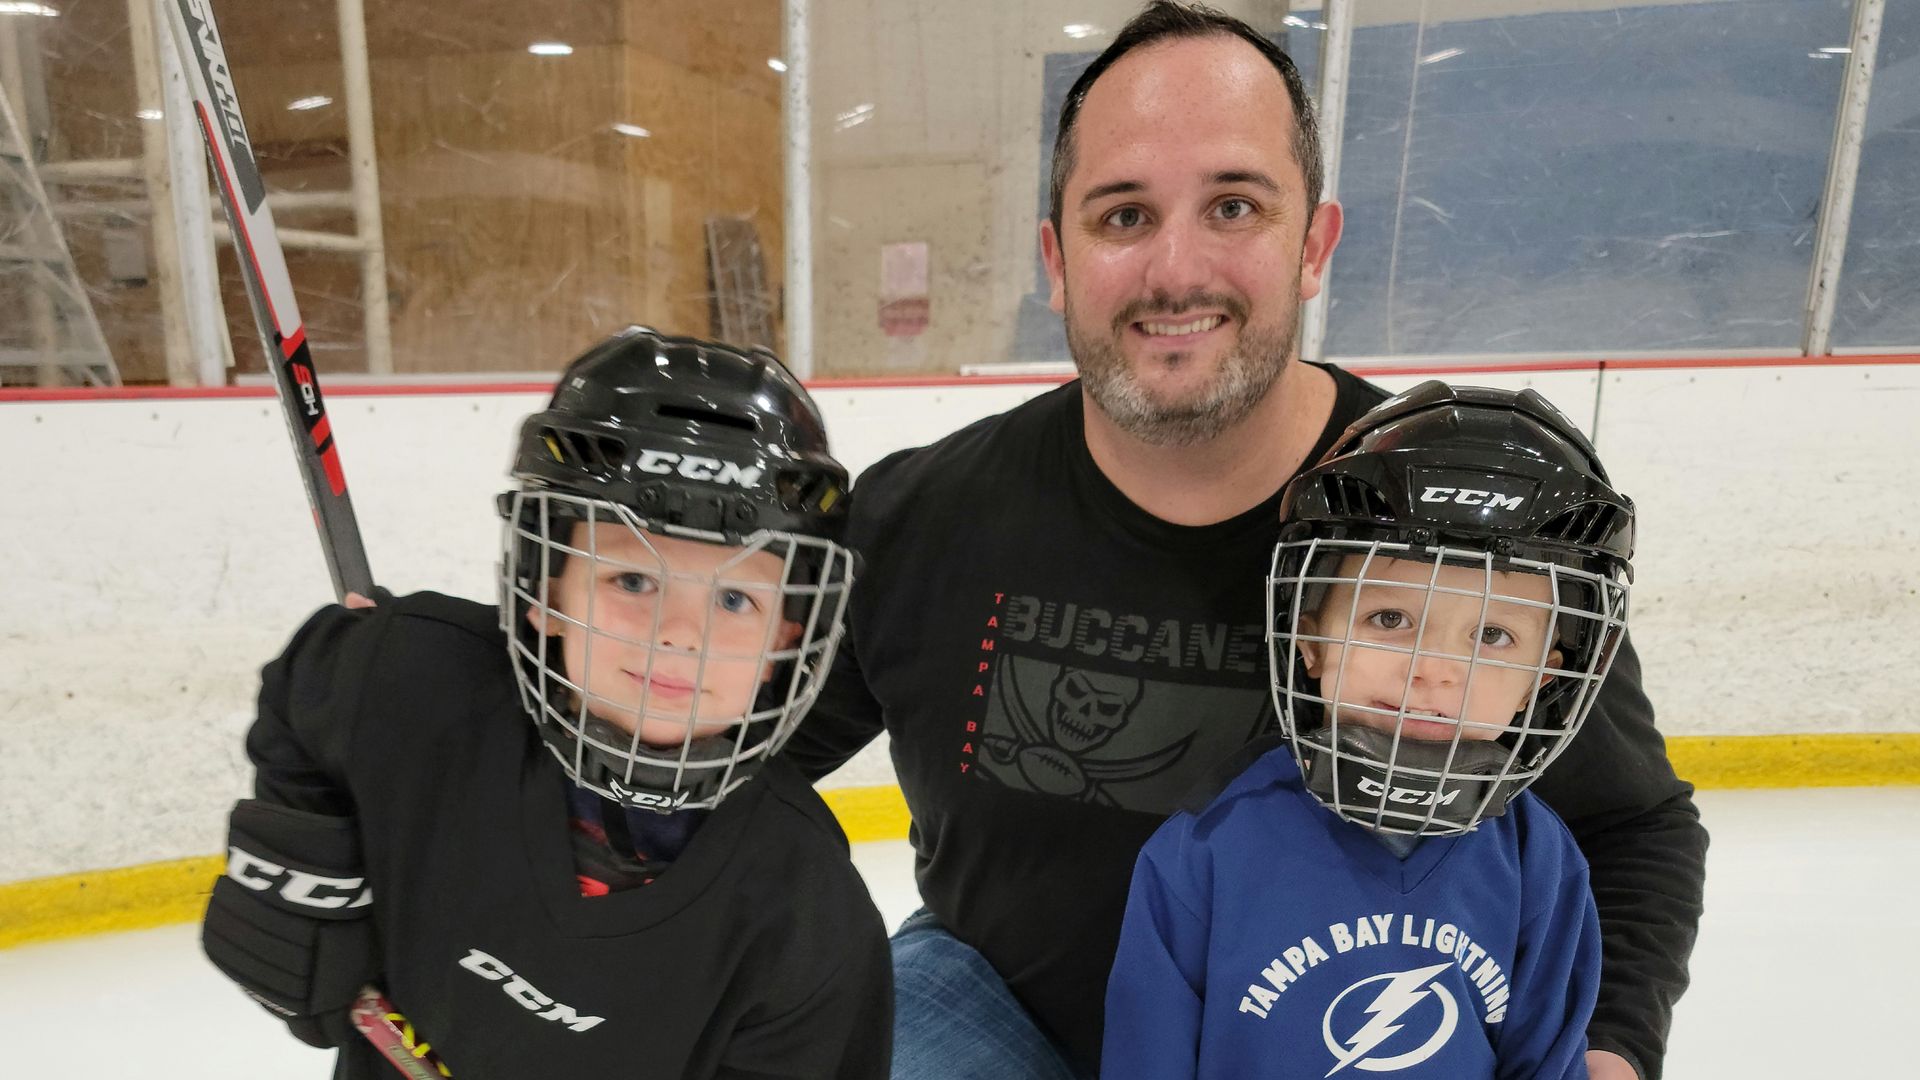 Goodwin and his kids in their hockey gear